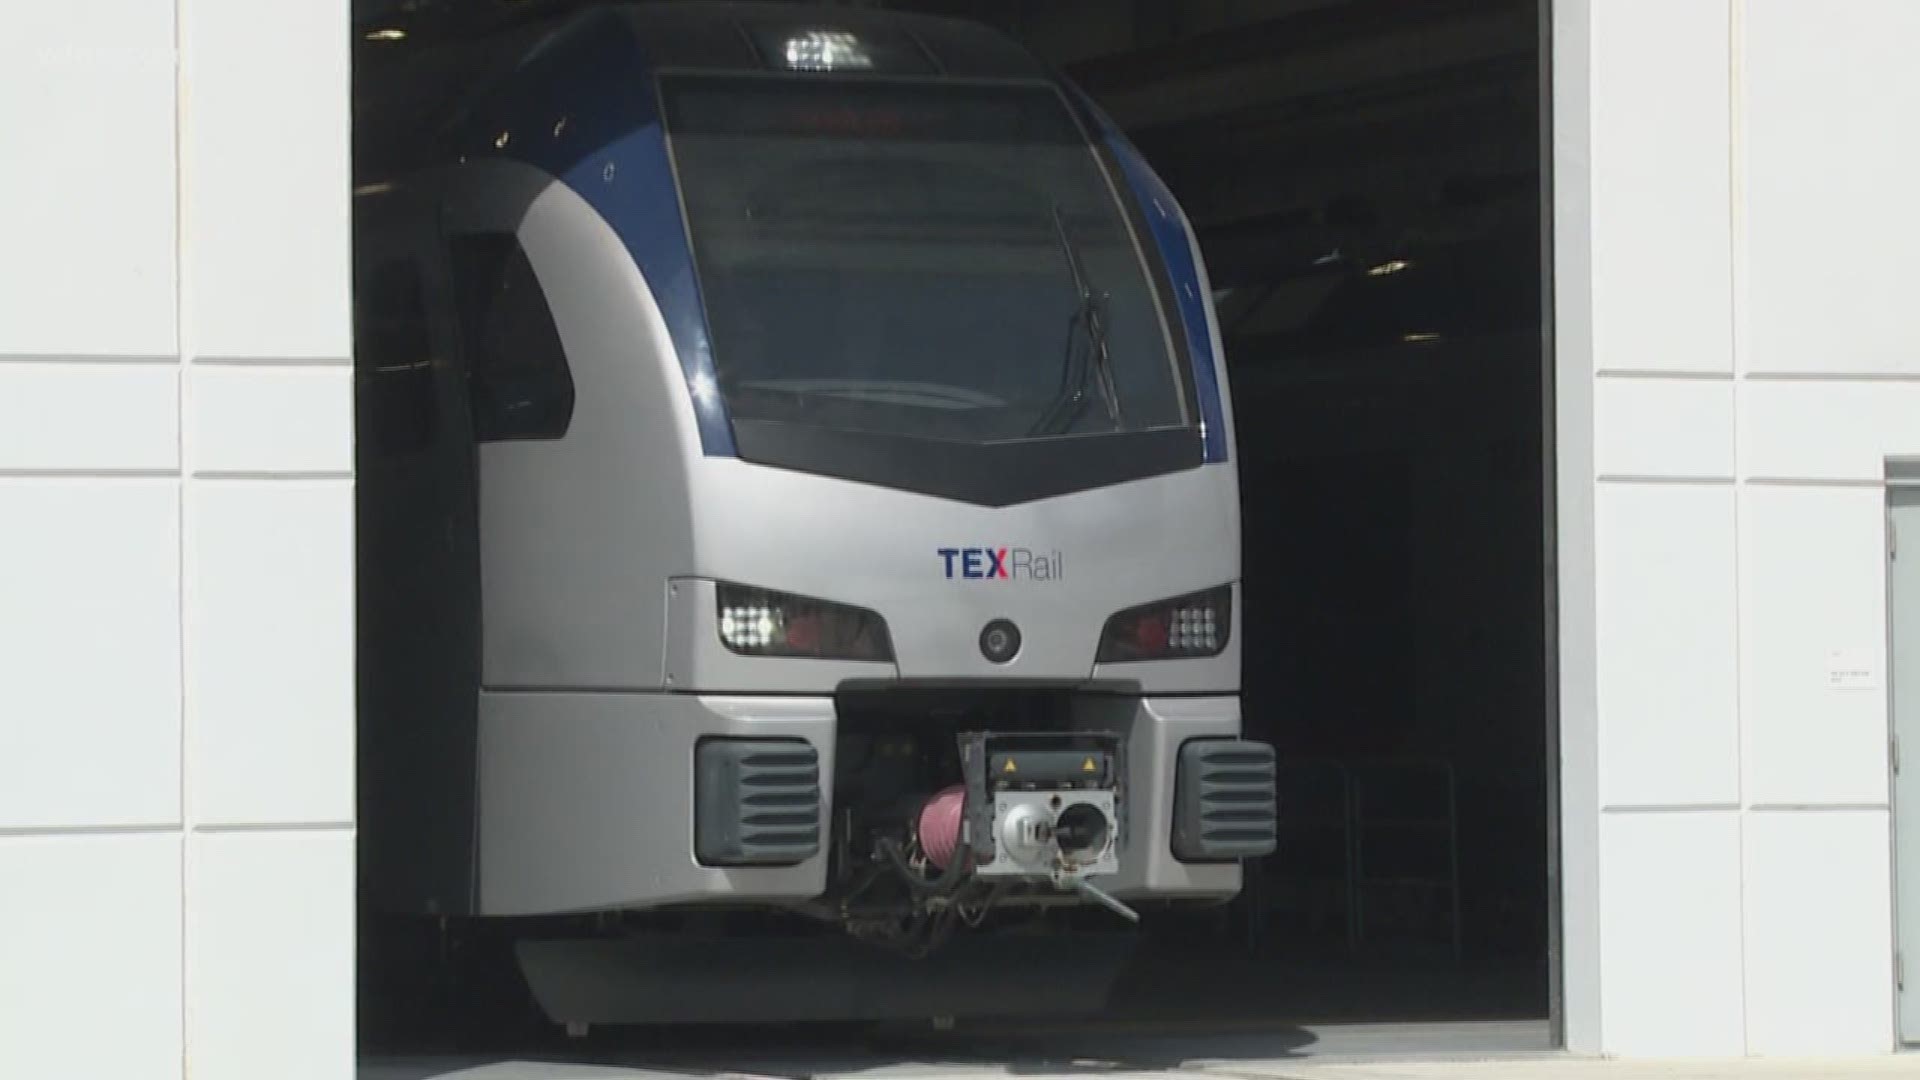 The train will connect downtown Fort Worth to DFW Airport.